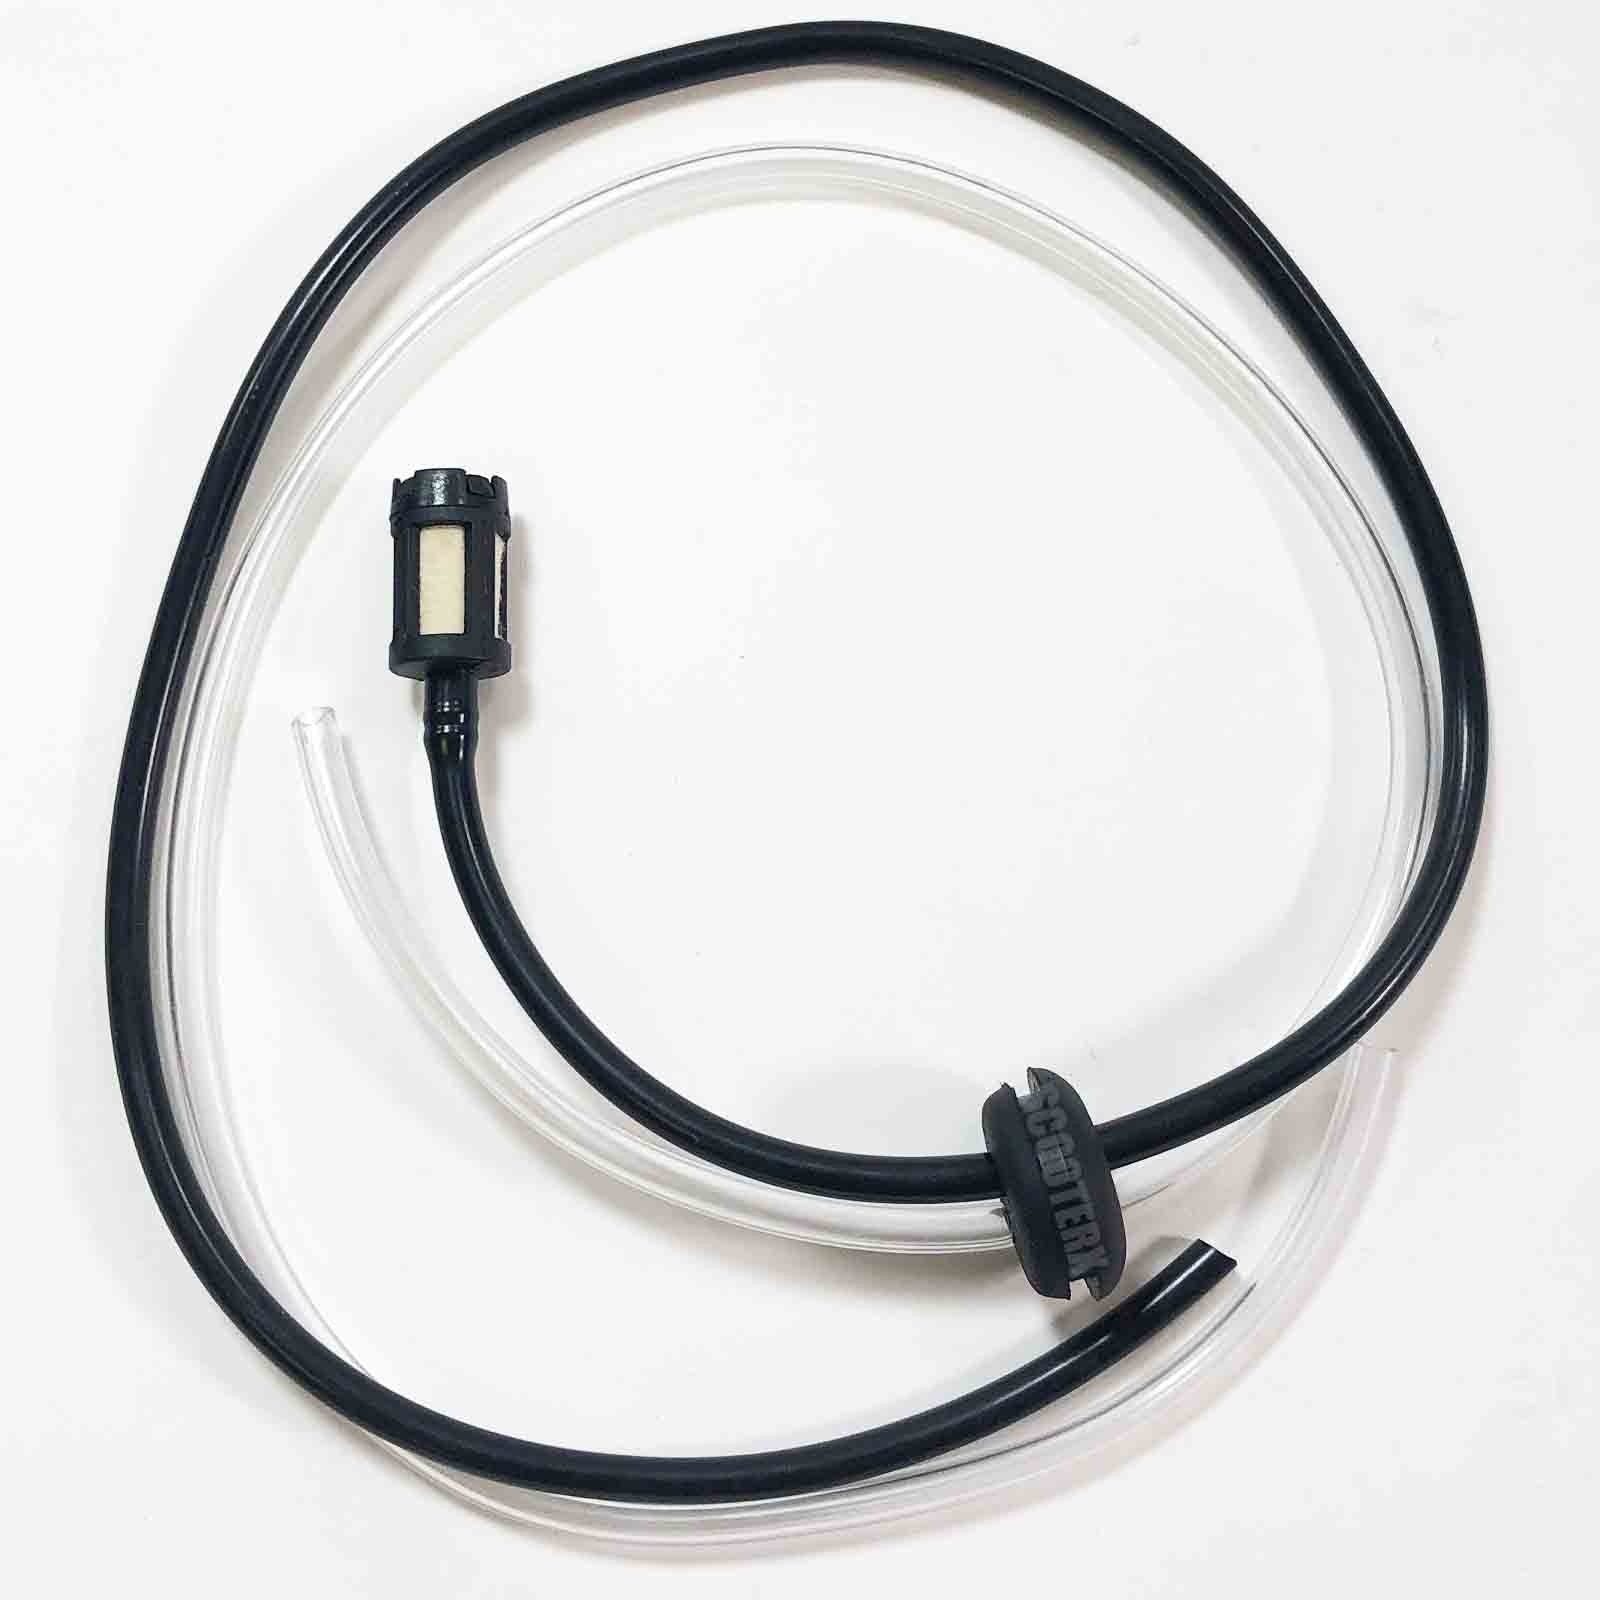 ScooterX FUEL LINES 16" For Dirt Dog Gas Scooter